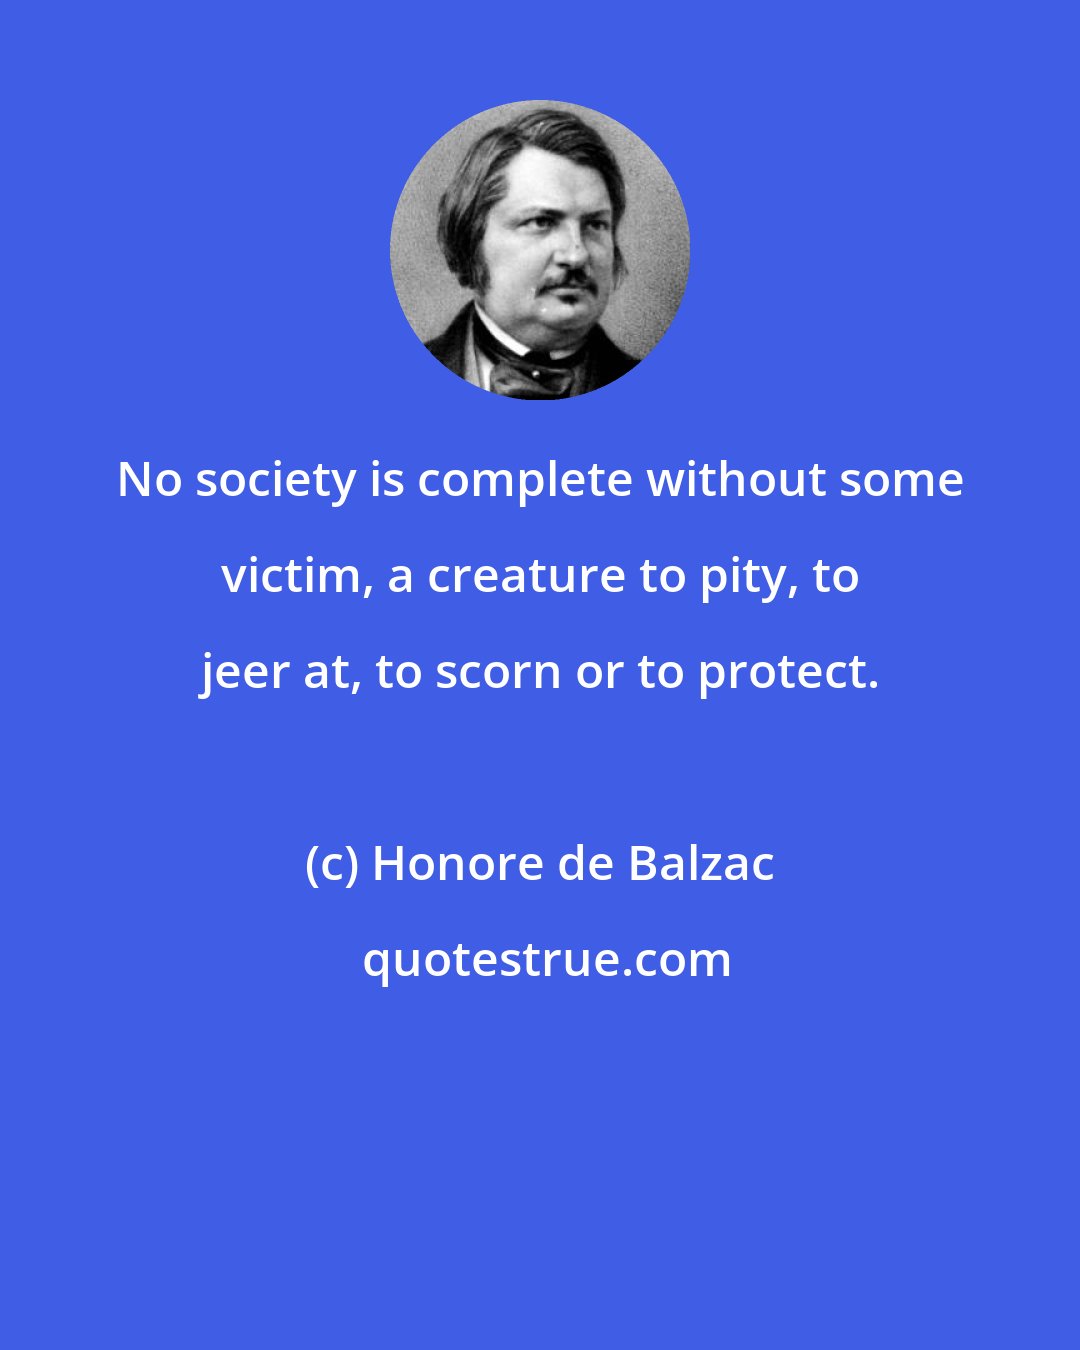 Honore de Balzac: No society is complete without some victim, a creature to pity, to jeer at, to scorn or to protect.